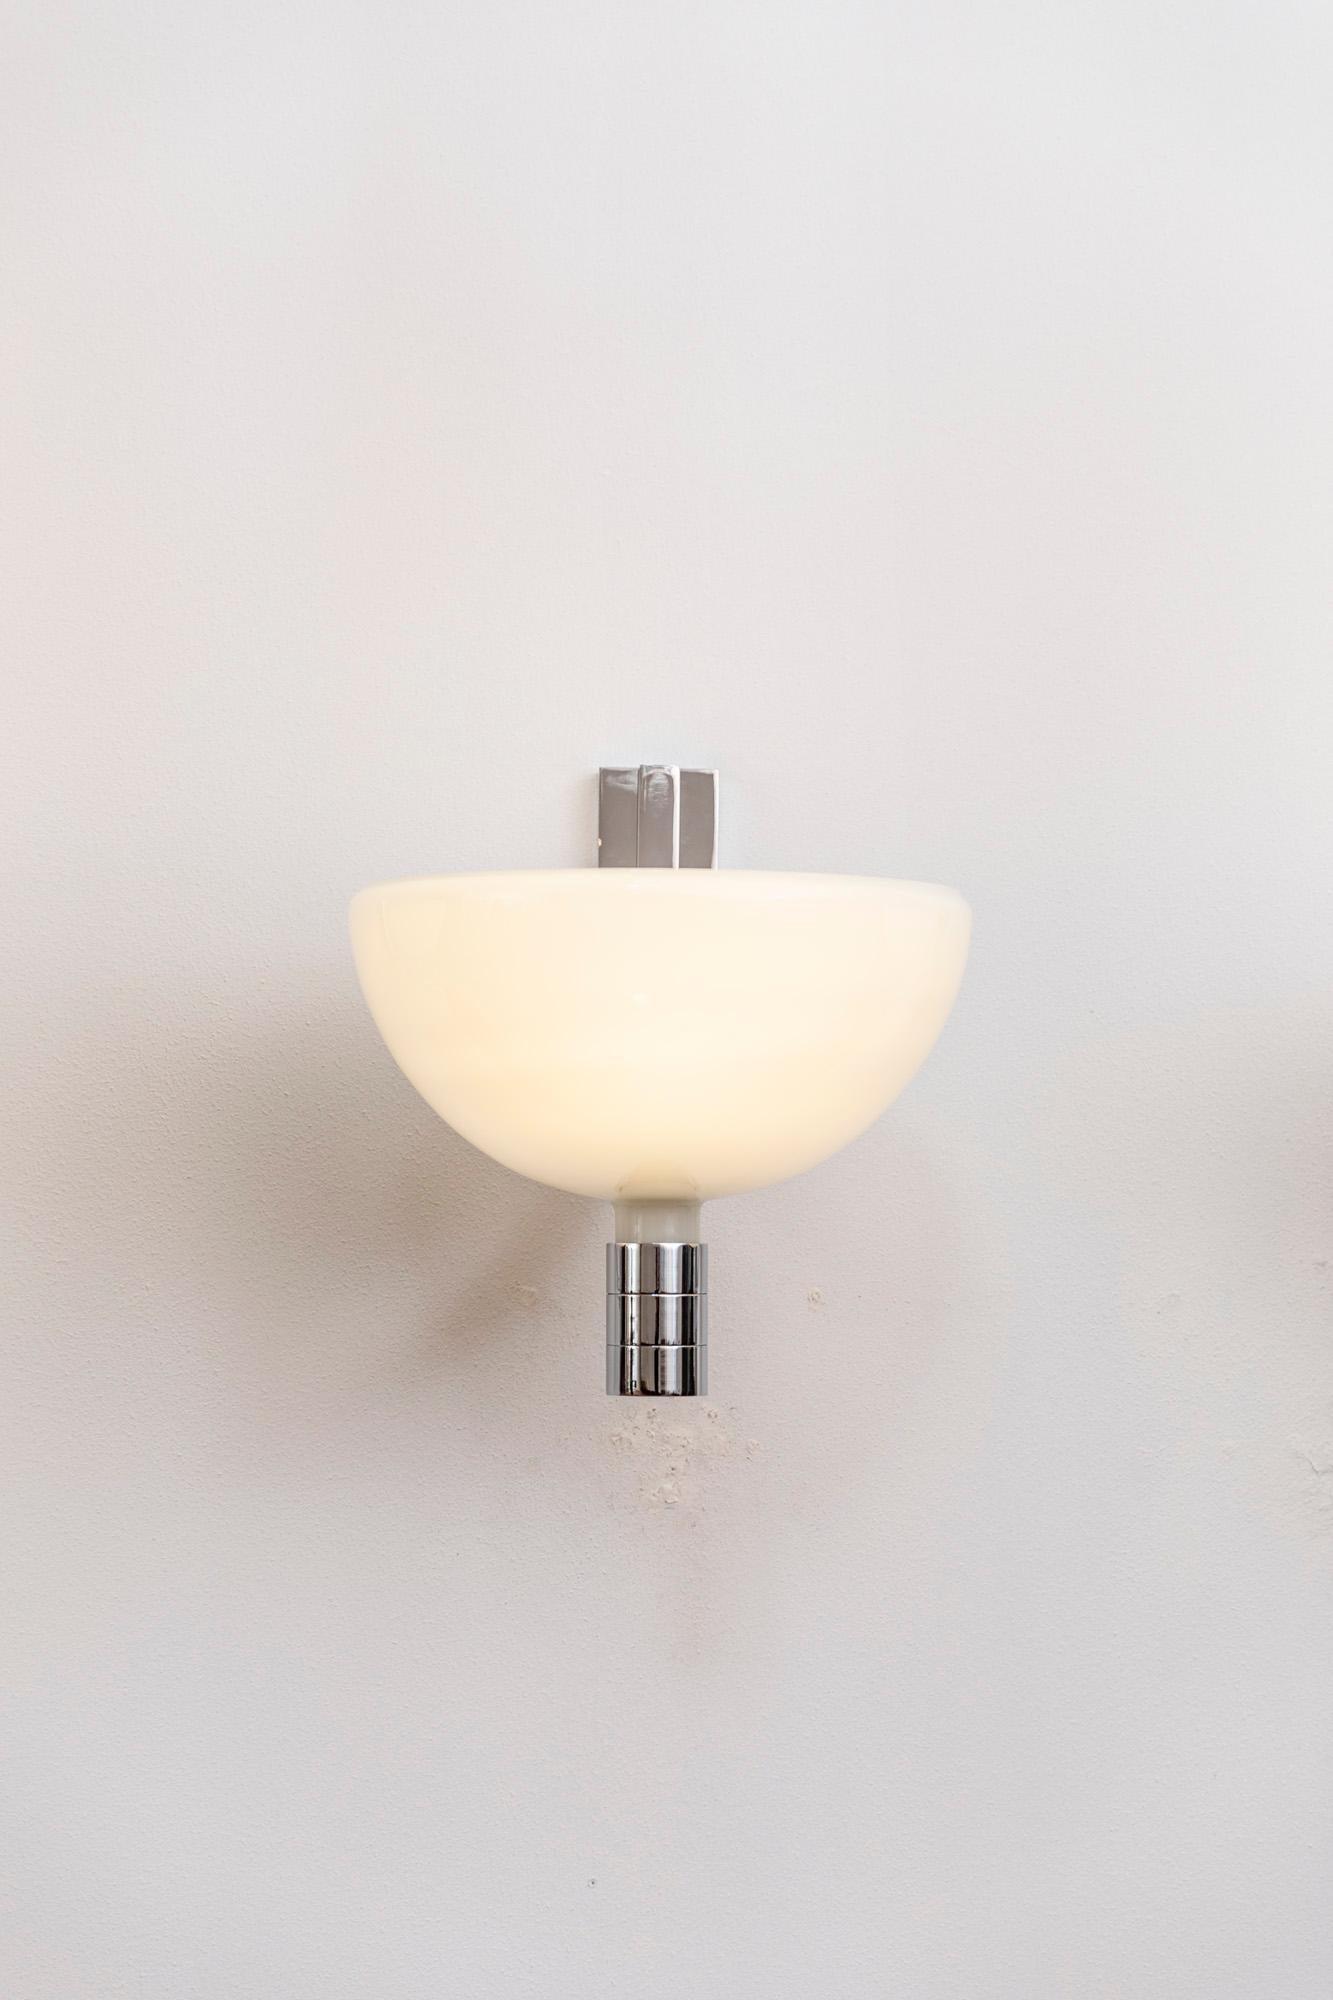 Set of midcentury Italian Wall Lights  by Franco Albini for Sirrah, 1968  For Sale 5